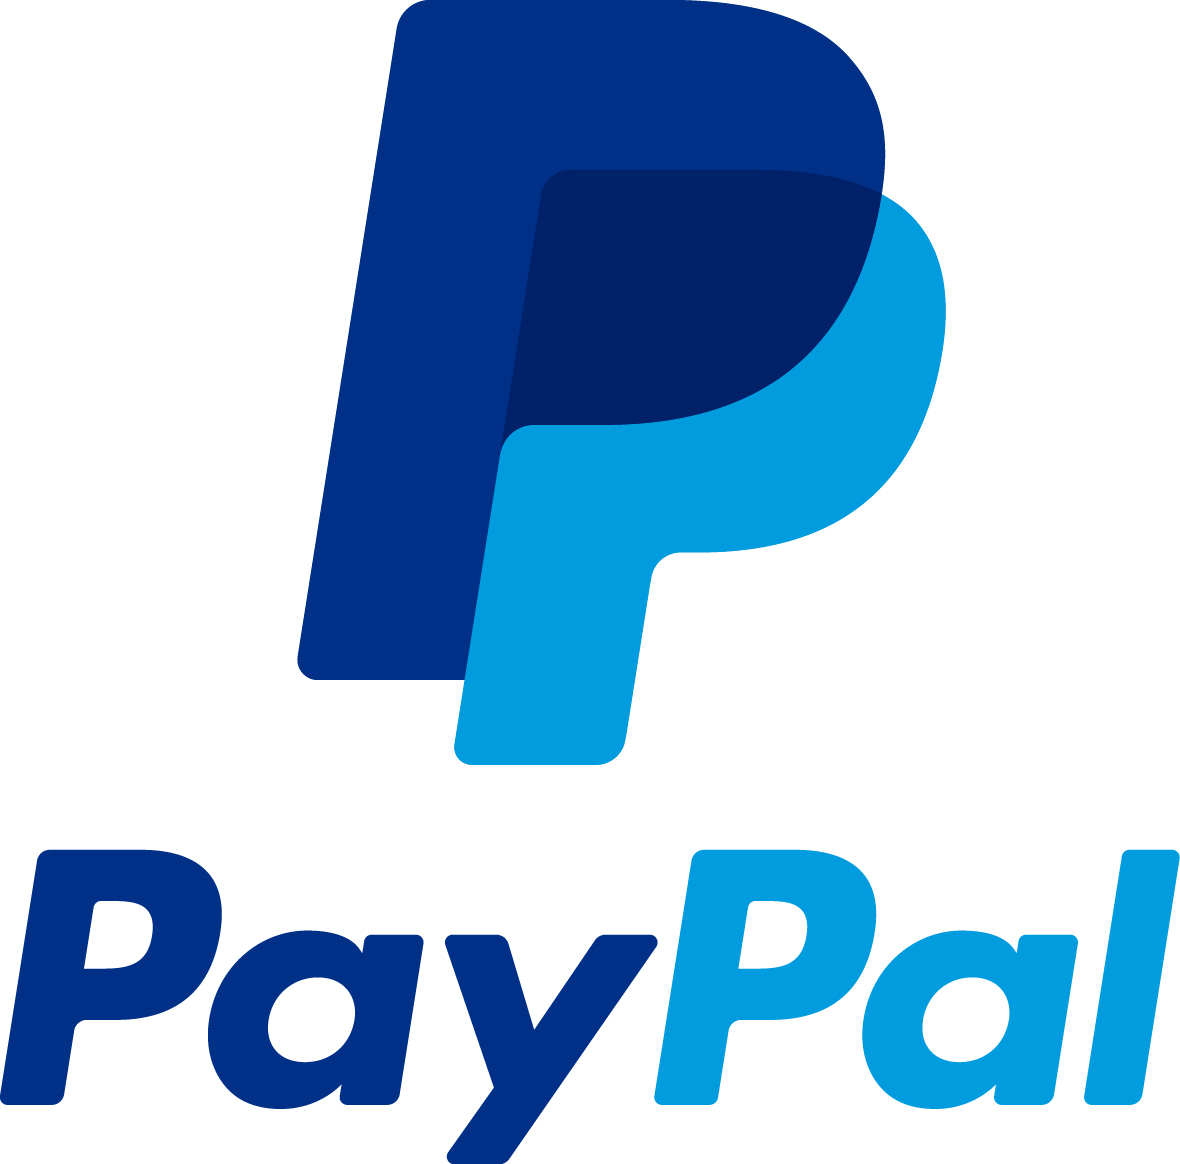 https://www.paypal.com/home